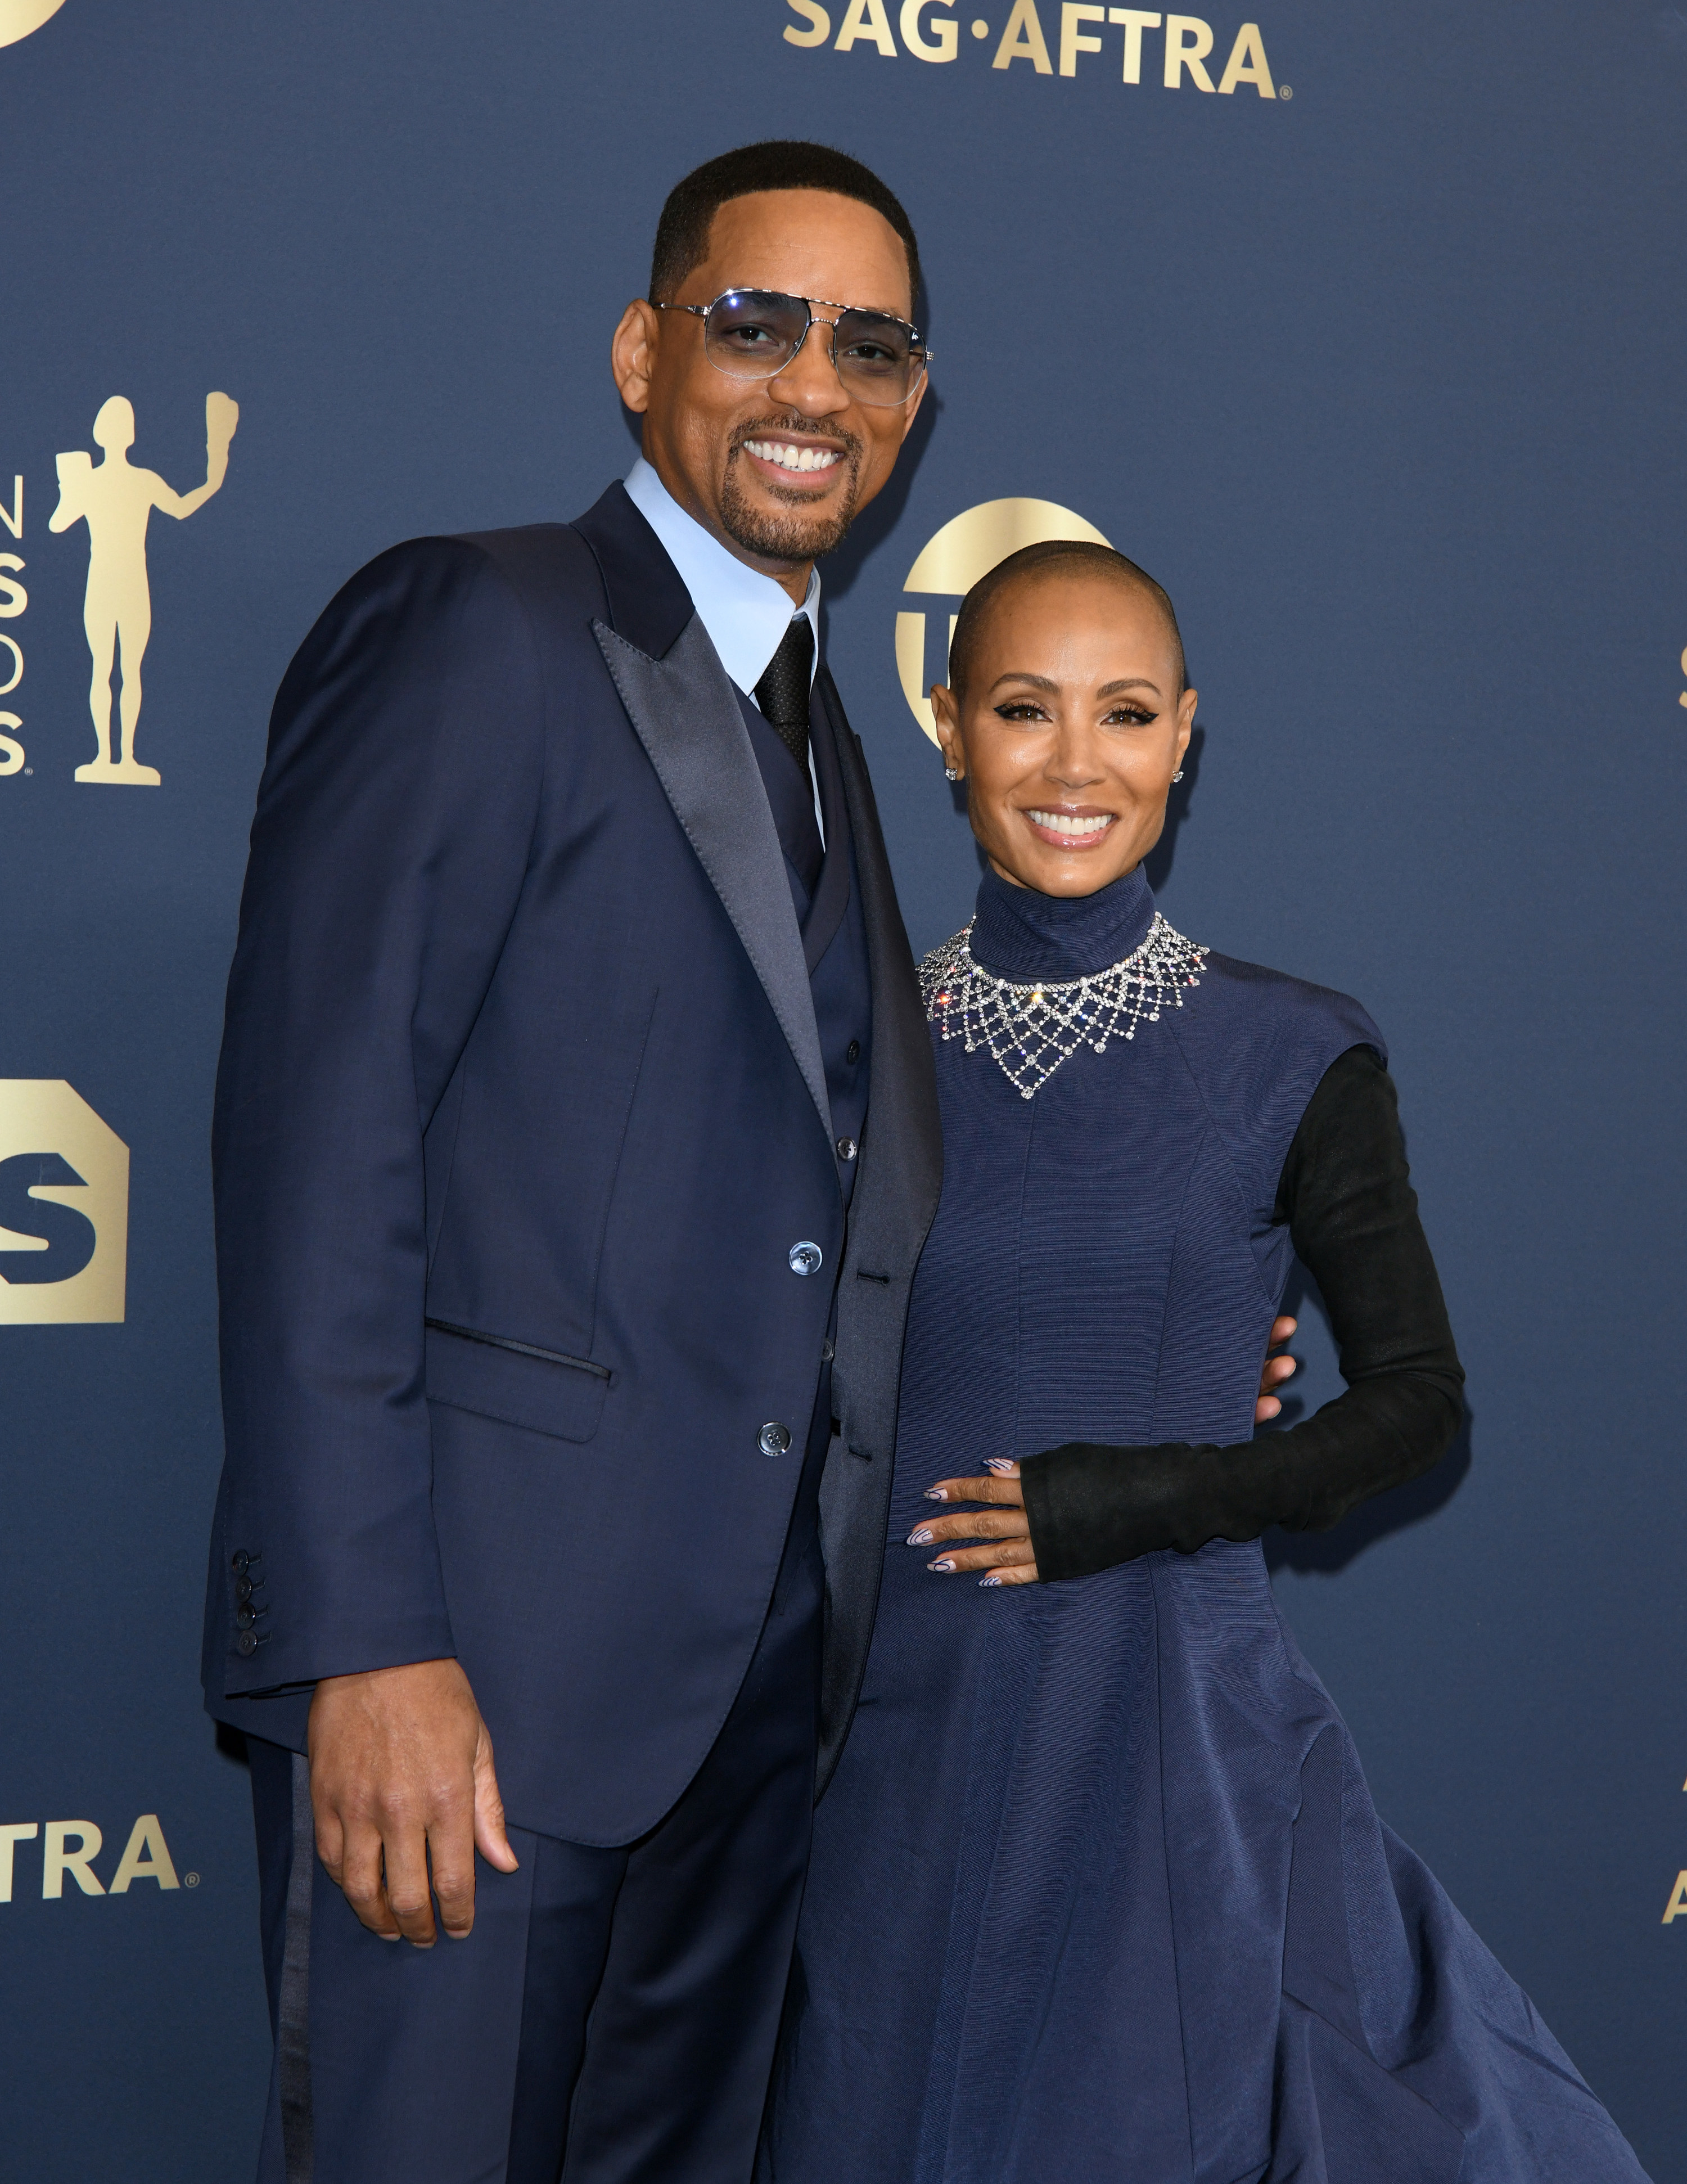 Will Smith and Jada Pinkett Smith attend the 28th Annual Screen Actors Guild Awards